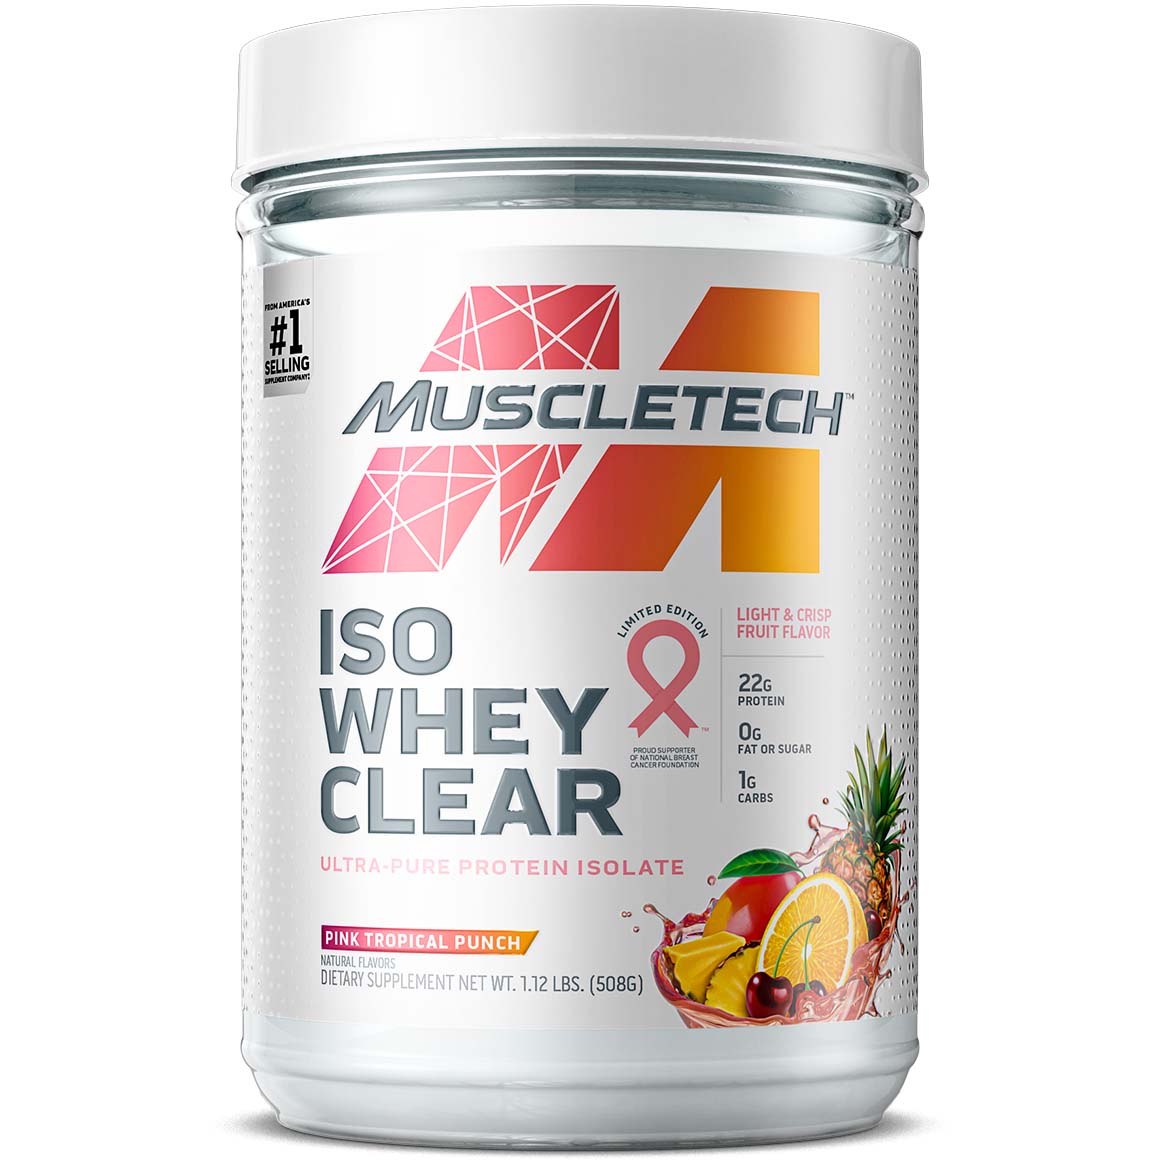 Muscletech Iso Whey Clear 1LB Pink Tropical Punch